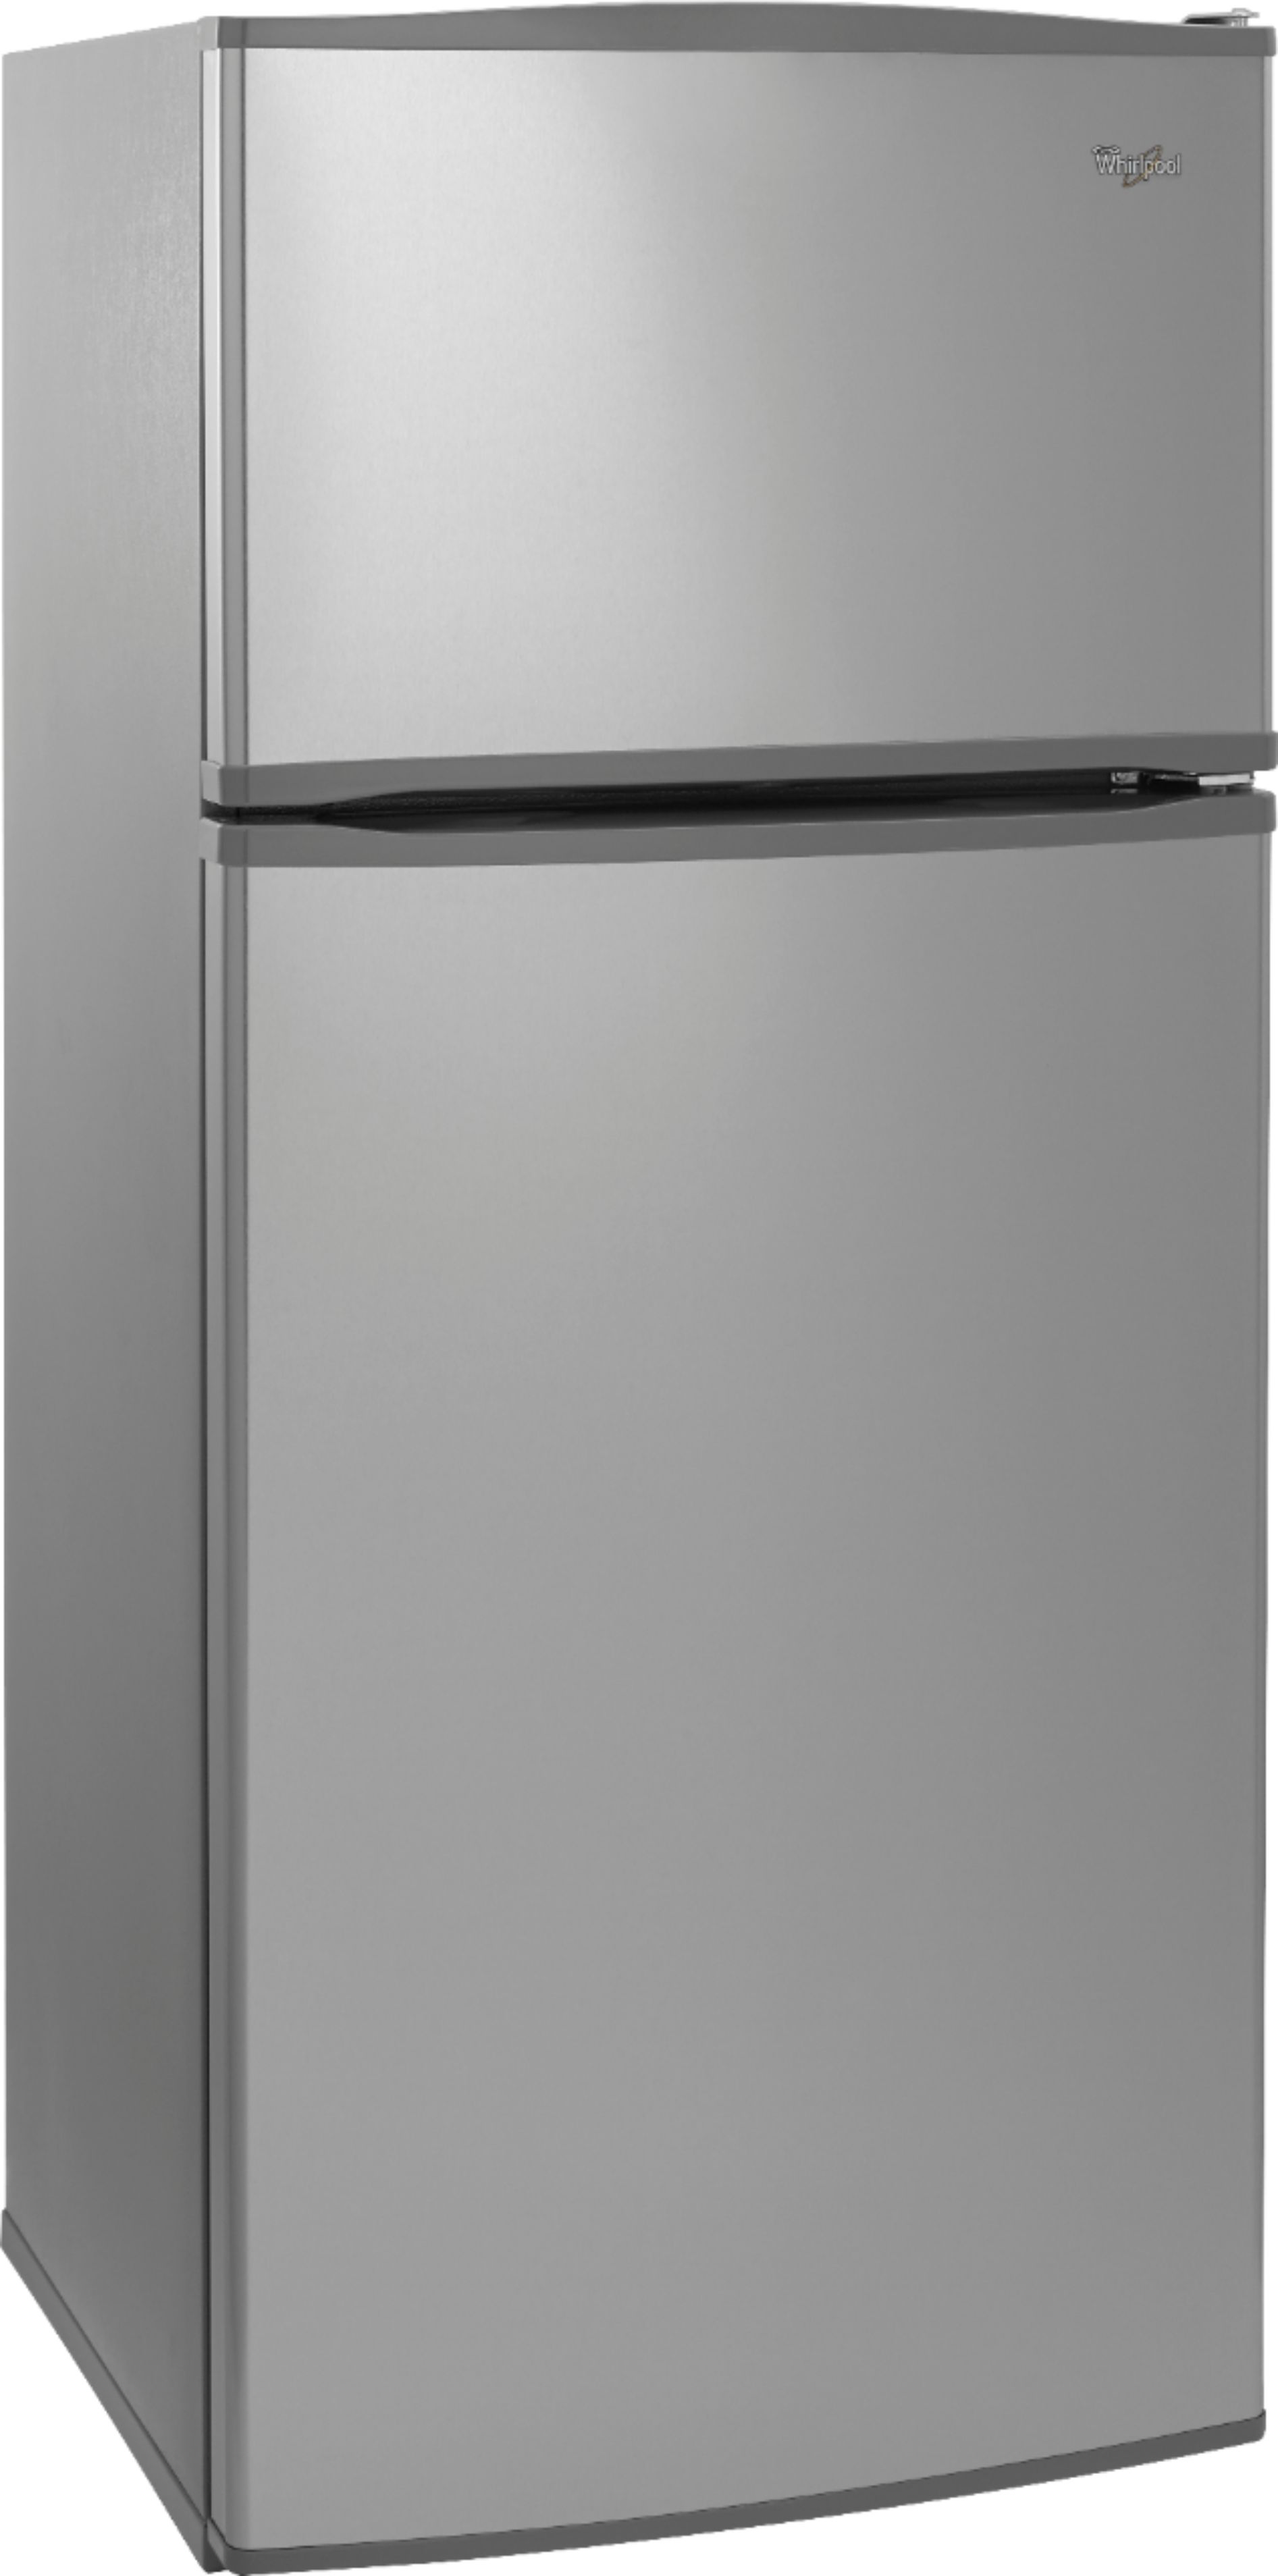 Angle View: Whirlpool - 16.0 Cu. Ft. Top-Freezer Refrigerator - Monochromatic stainless steel